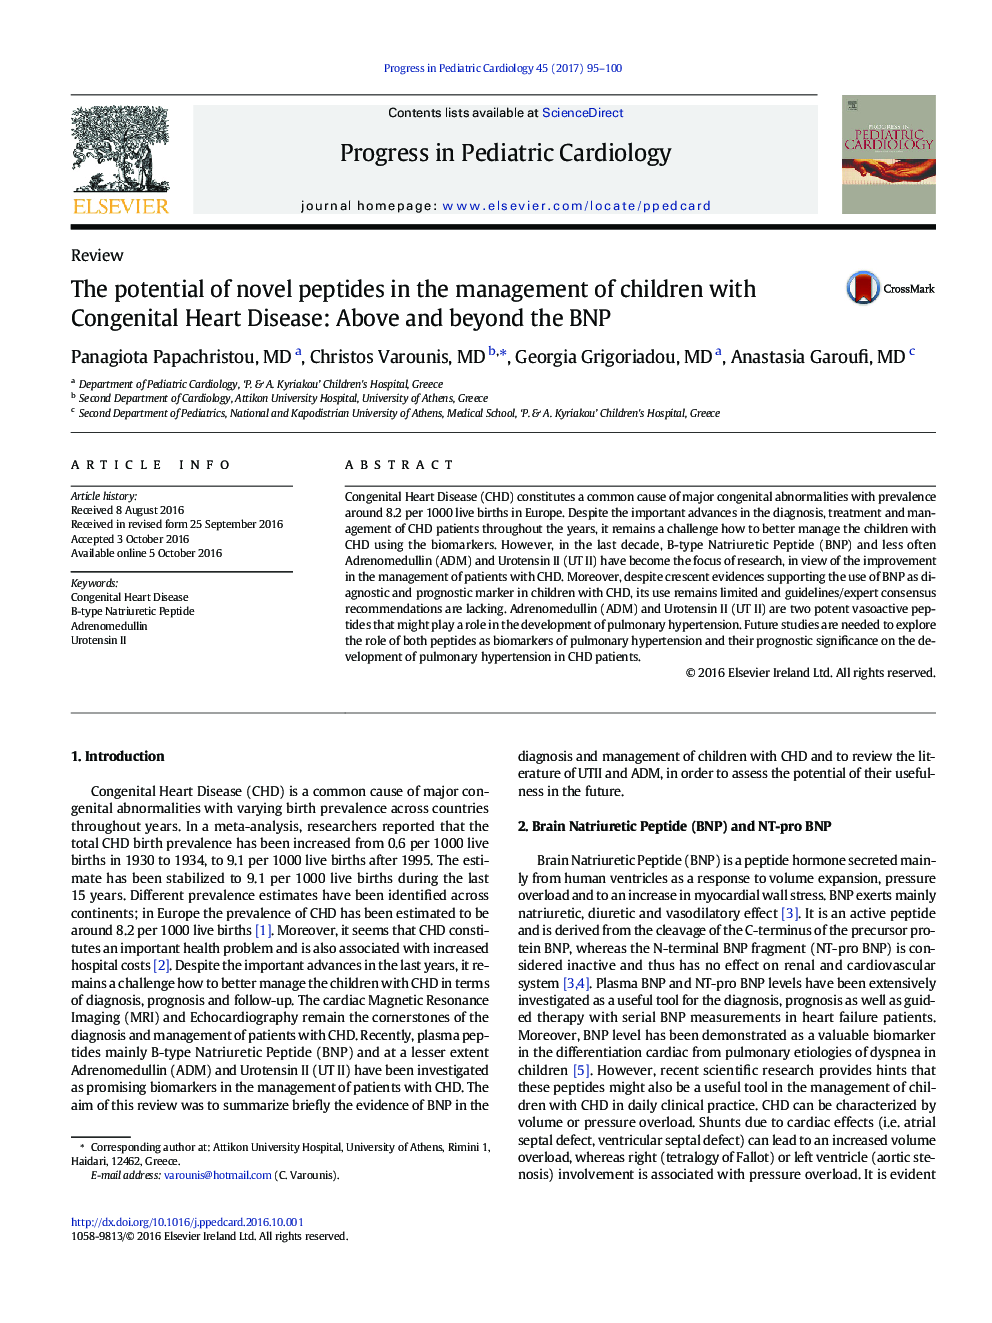 ReviewThe potential of novel peptides in the management of children with Congenital Heart Disease: Above and beyond the BNP